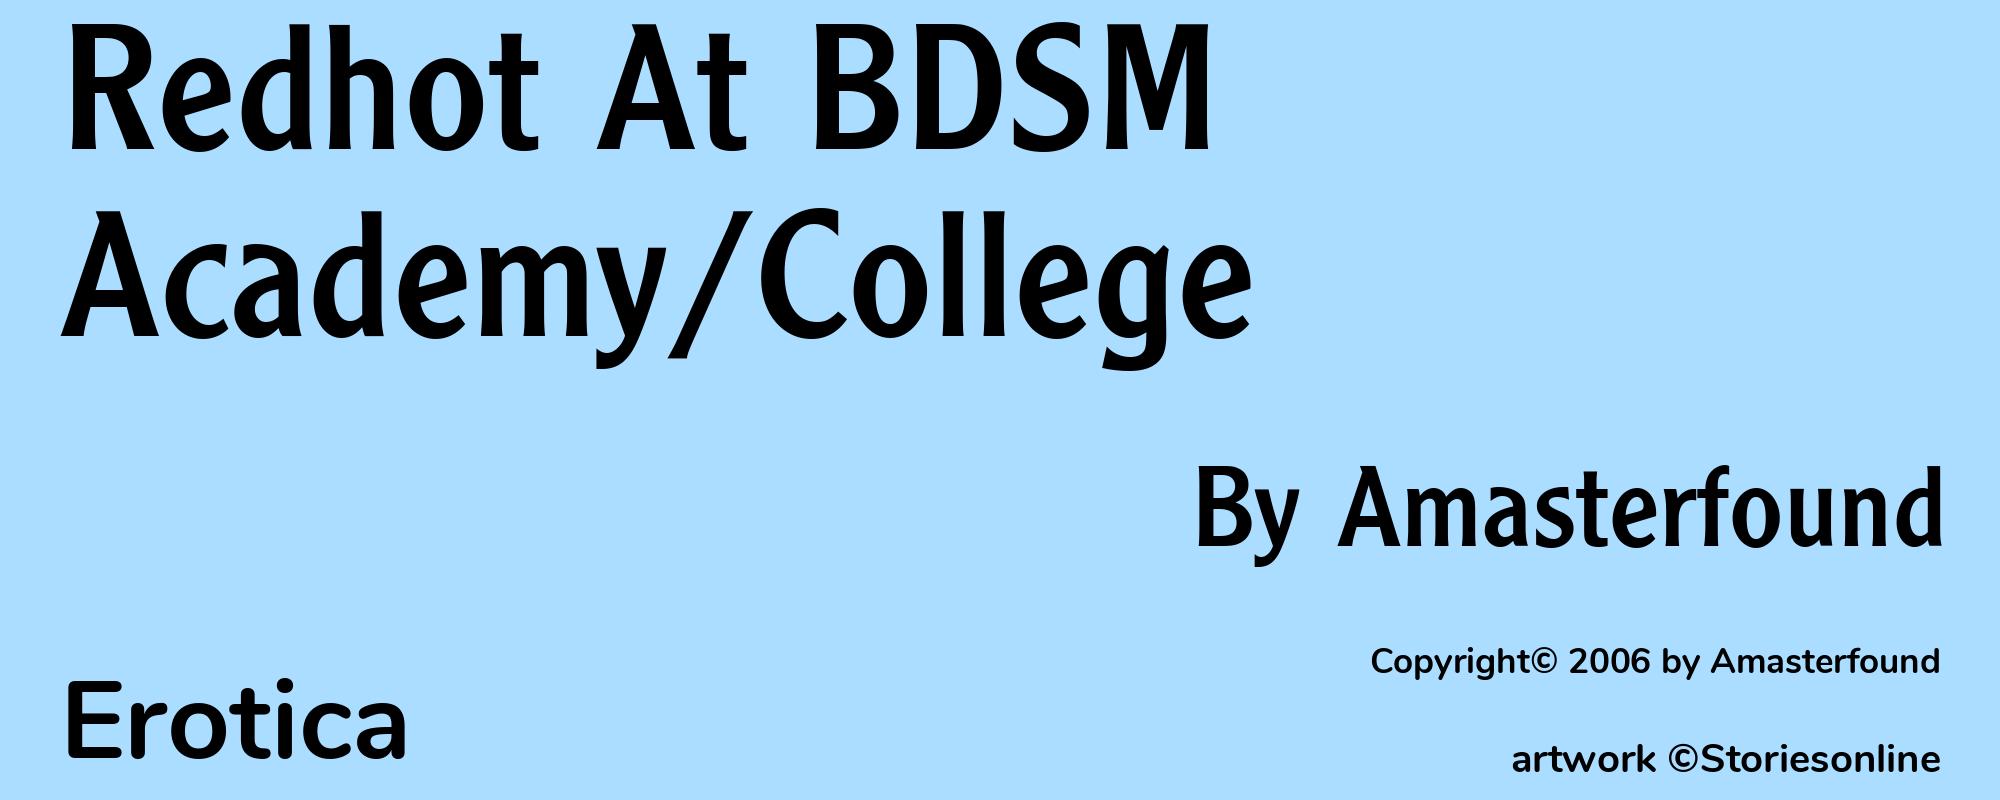 Redhot At BDSM Academy/College - Cover